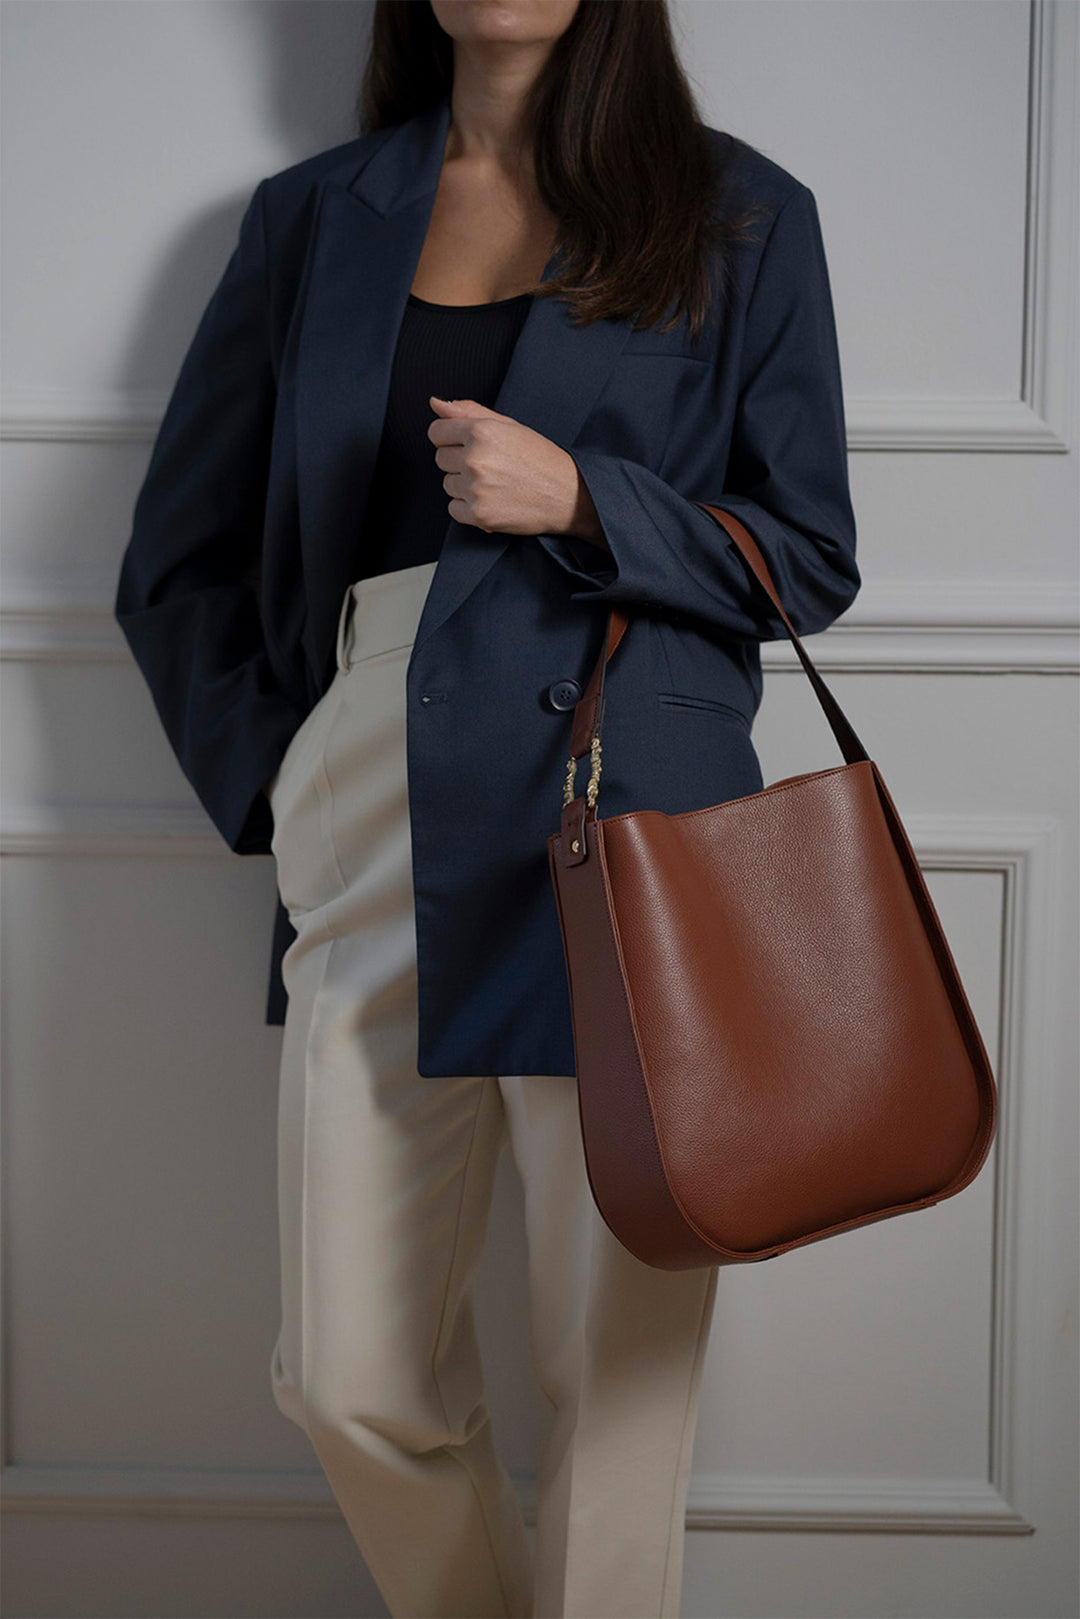 Woman in a navy blazer and white pants holding a brown leather handbag